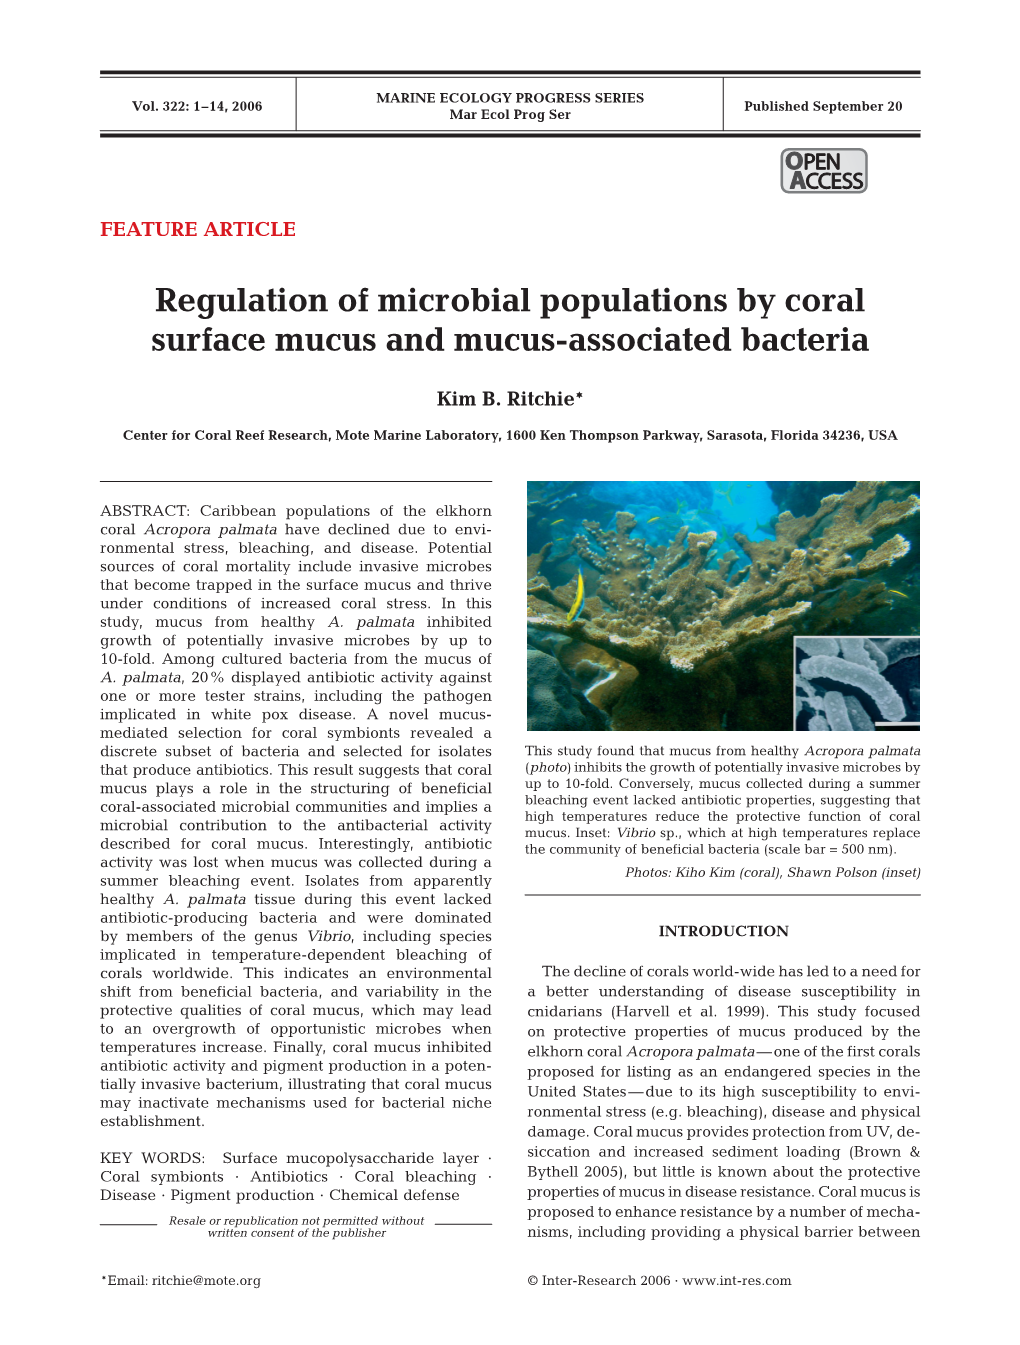 Regulation of Microbial Populations by Coral Surface Mucus and Mucus-Associated Bacteria